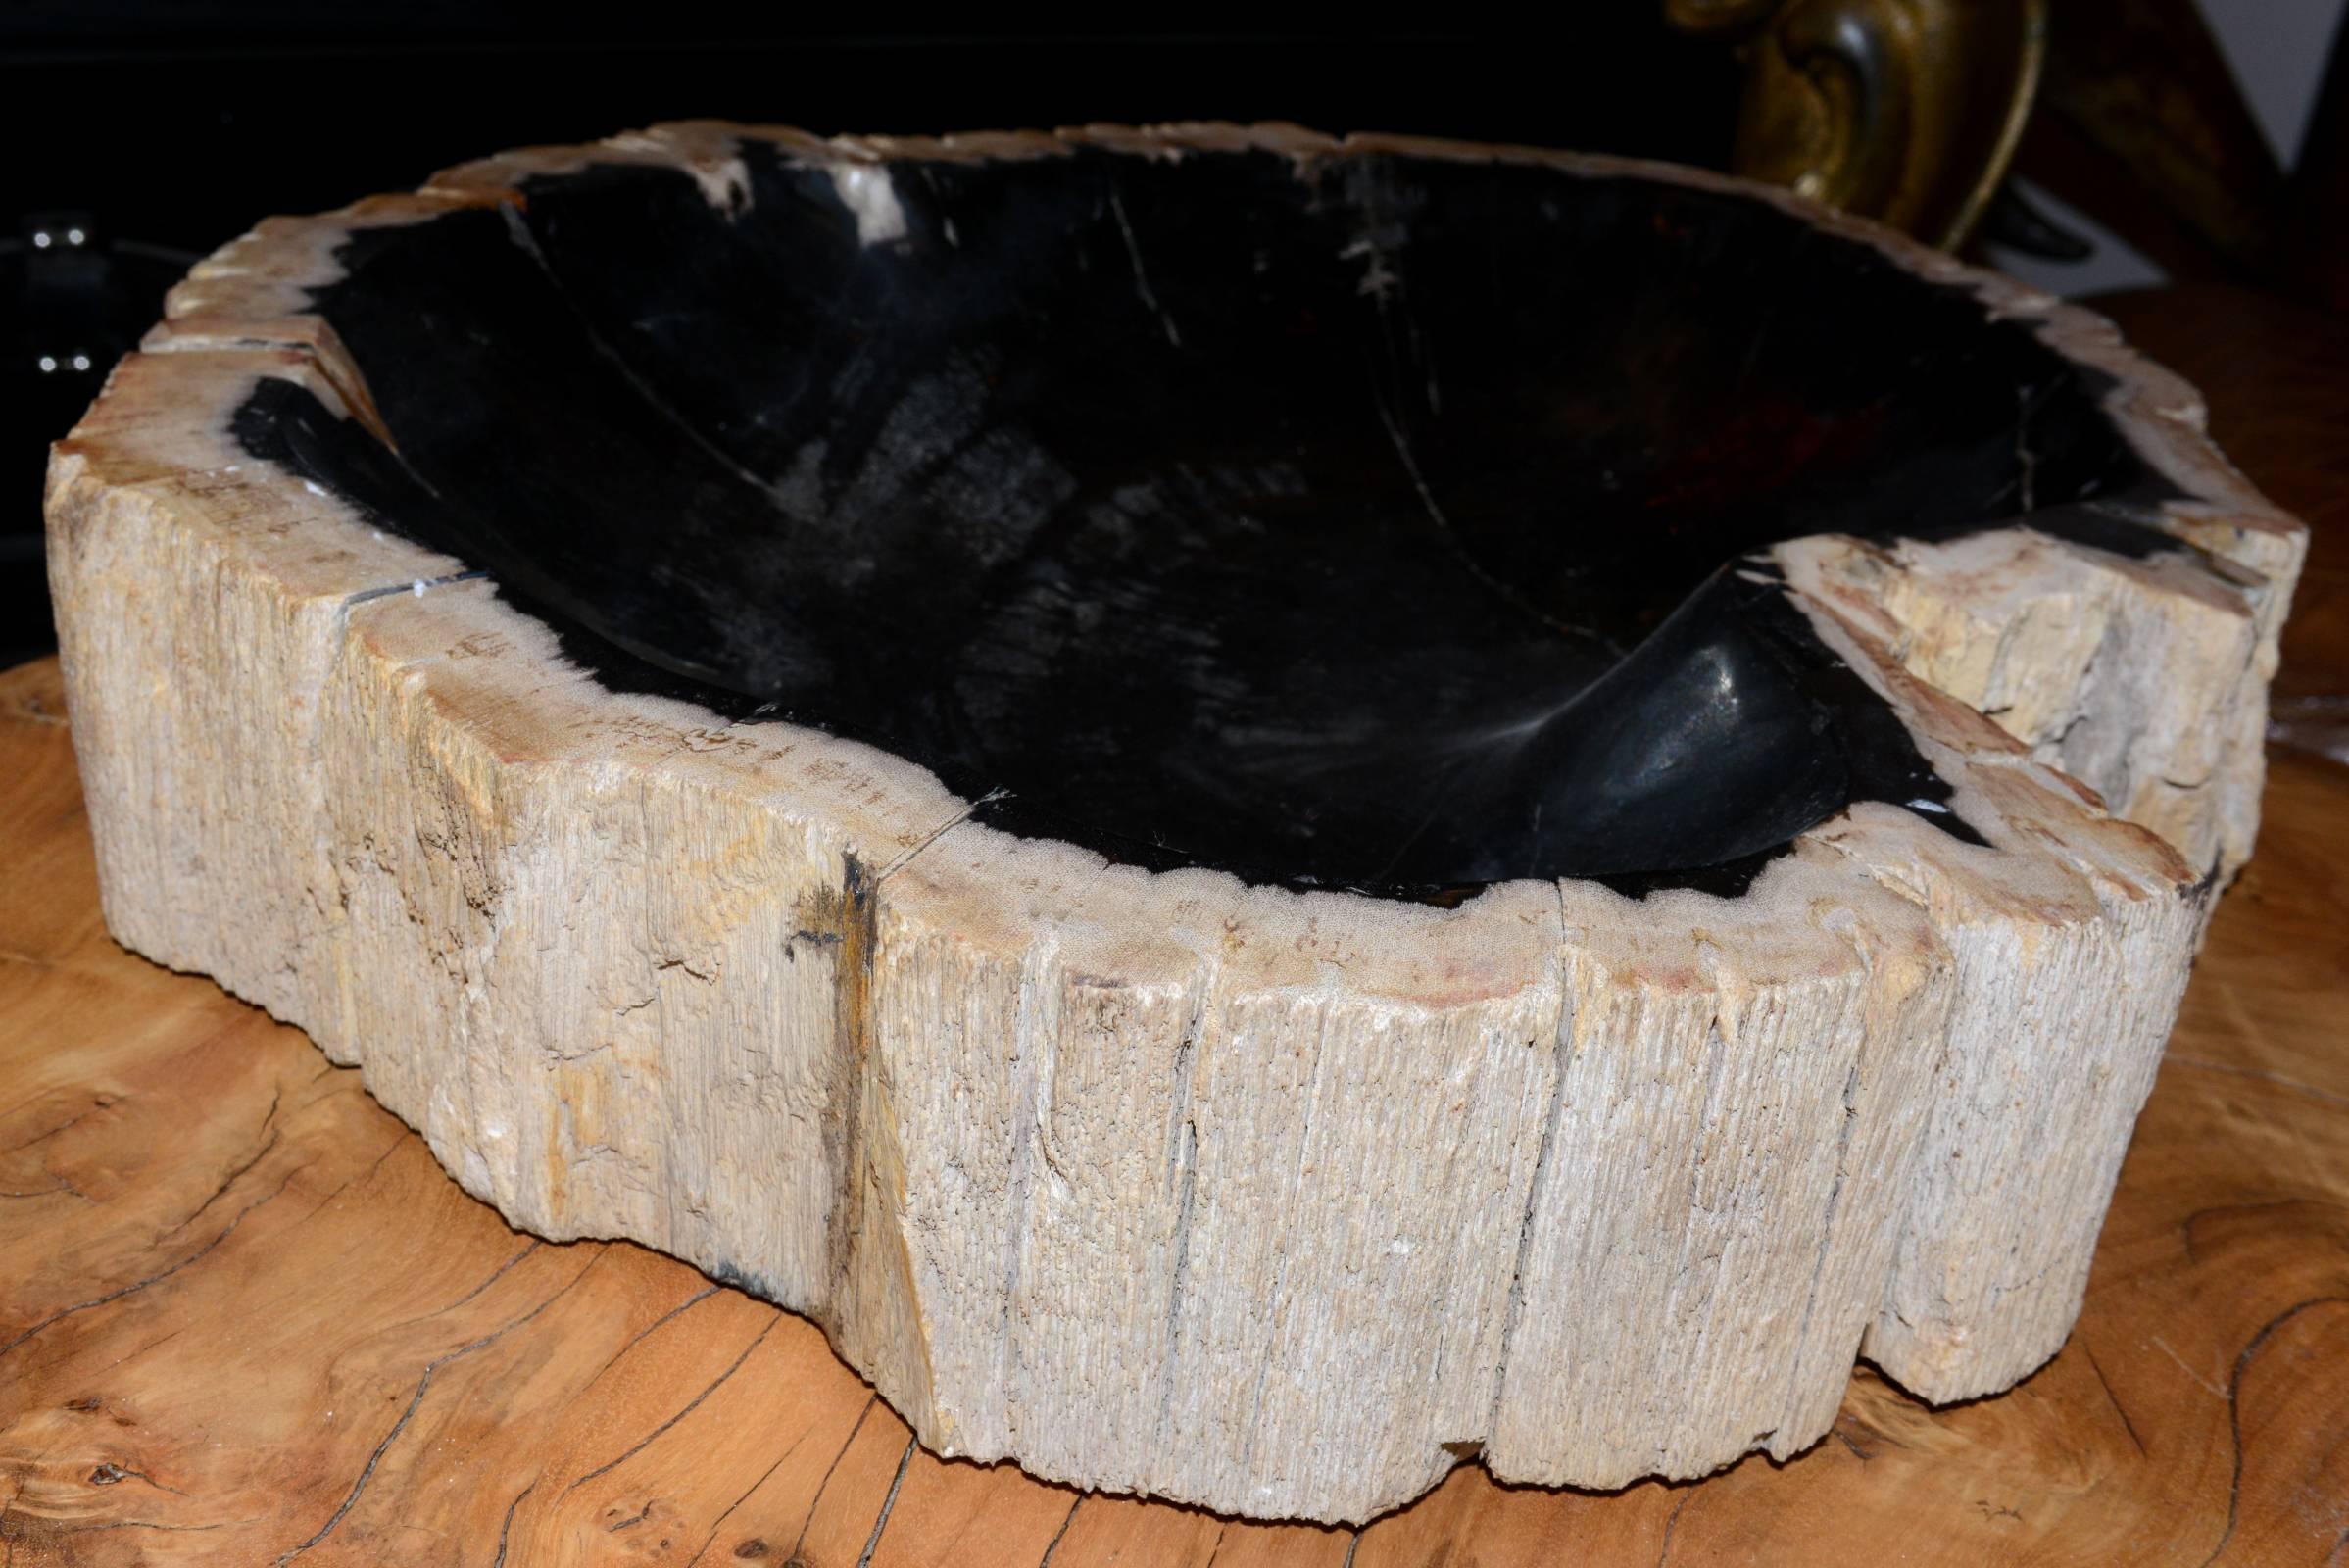 Ashtray in petrified wood A from Indonesia.
Authentic 15th century petrified wood.
Weight: 9kg.
Available now.
